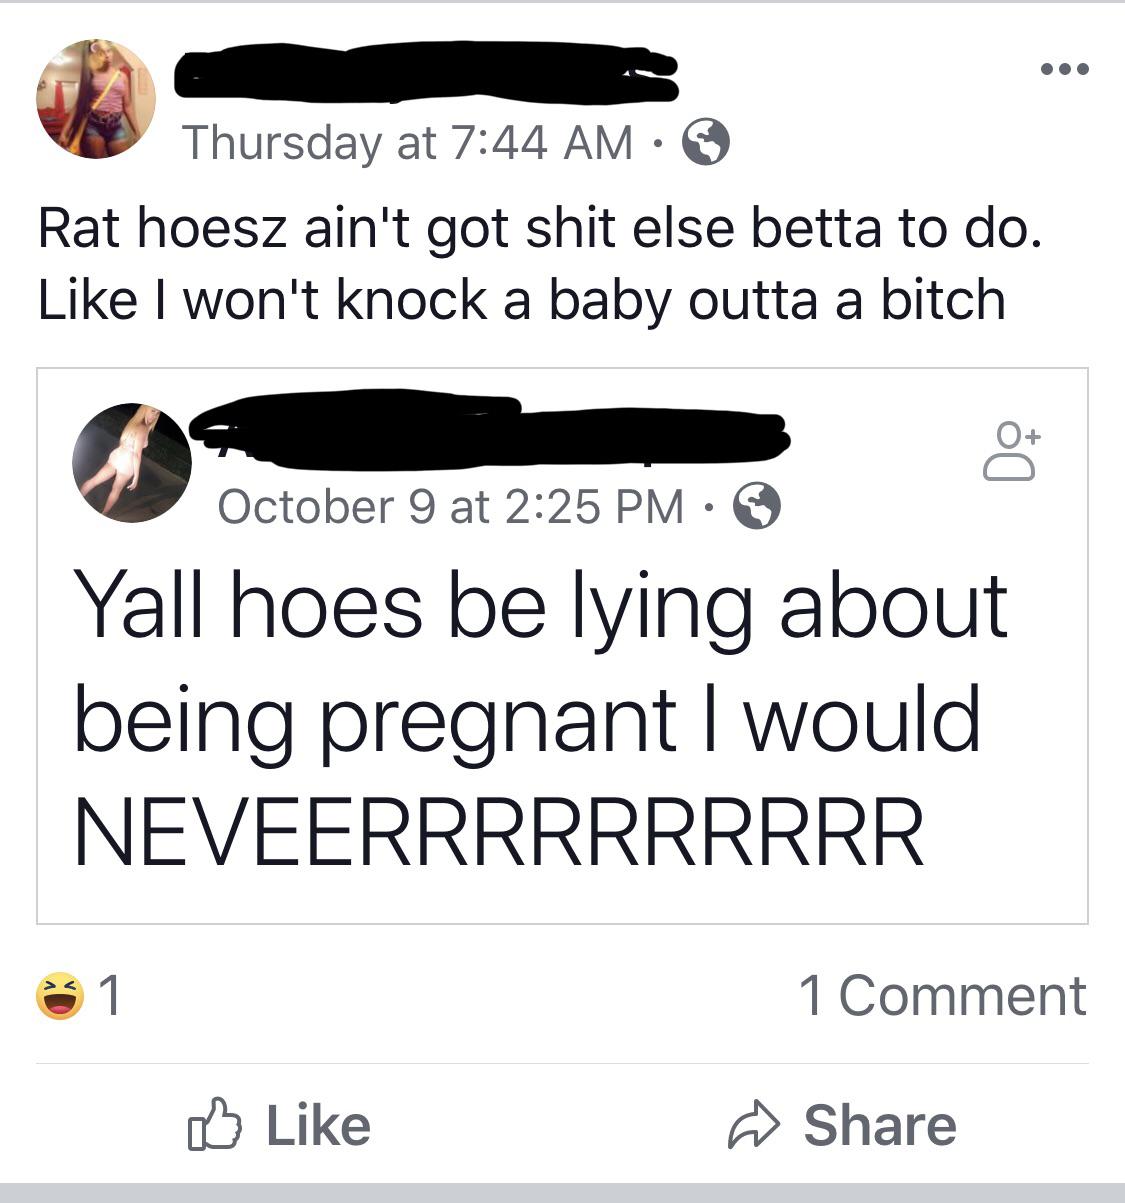 angle - Thursday at Rat hoesz ain't got shit else betta to do. I won't knock a baby outta a bitch October 9 at Yall hoes be lying about being pregnant I would Neveerrrrrrrrrr 1 Comment 0 ~